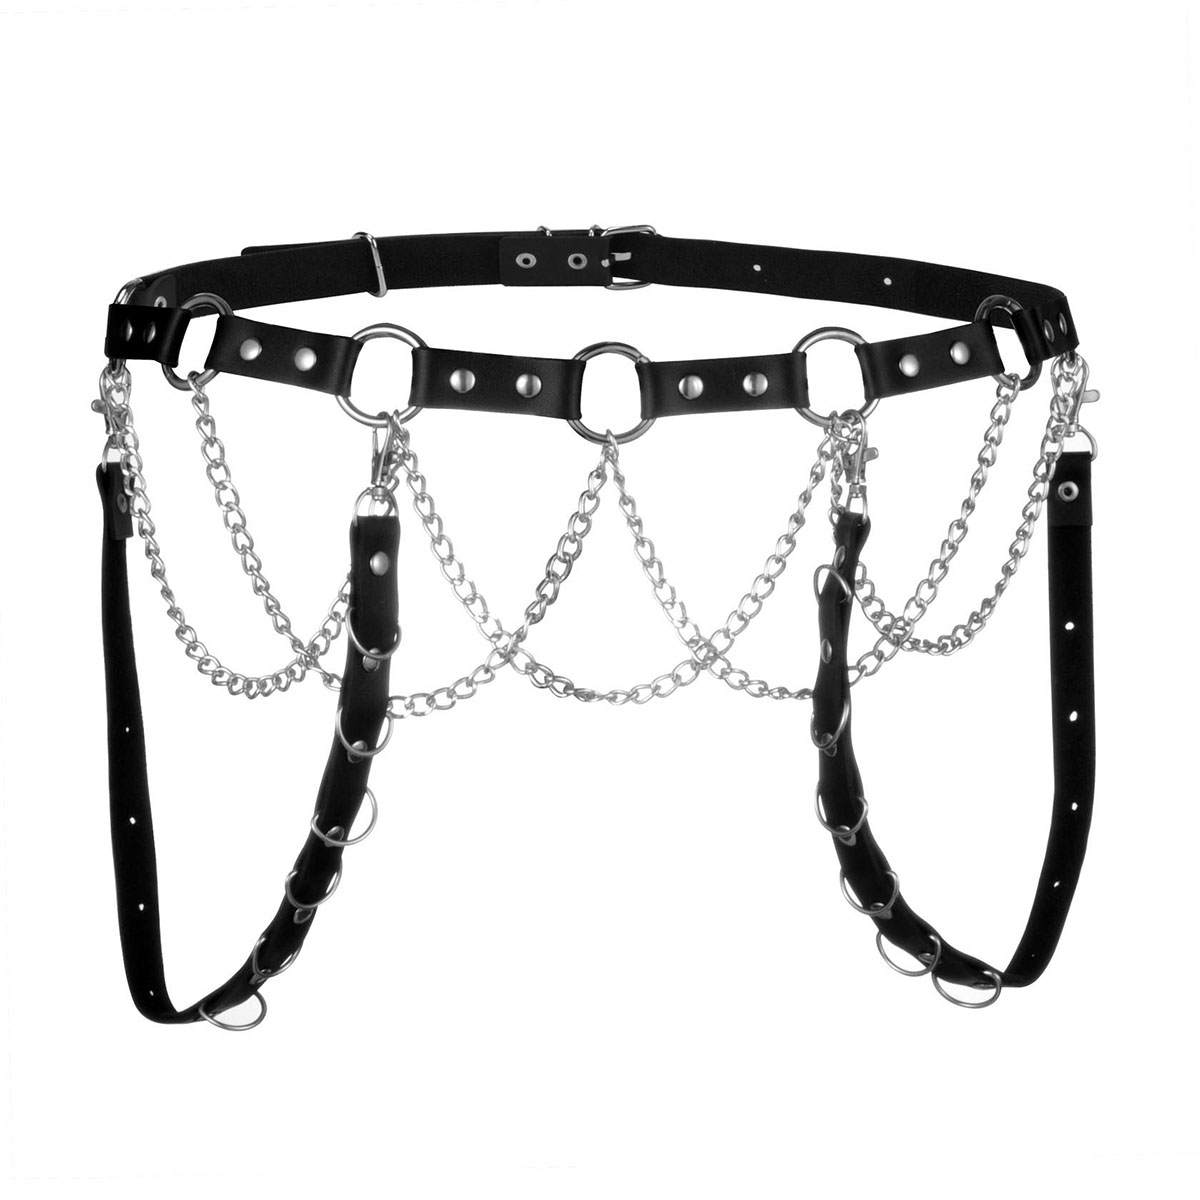 Black rock punk belt with five rings and chains